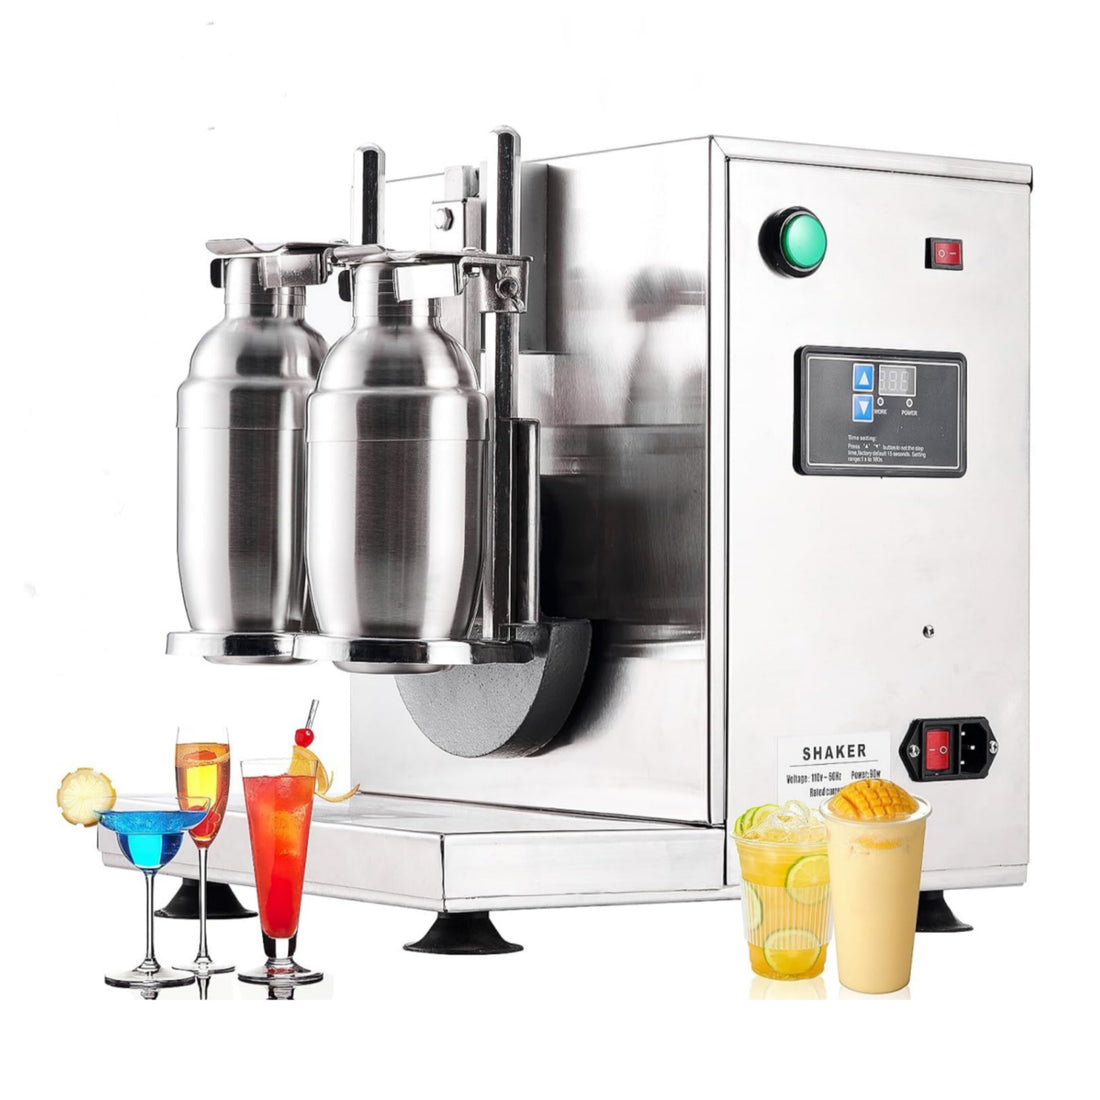 Automatic Milk Tea Shaking Machine, Electric Double Frame Milk Tea and Cocktail Shaker, 400r/min, Stainless Steel & Double Cups for for Bubble Tea, Boba Tea, Juice, Coffee, Milk, Wine